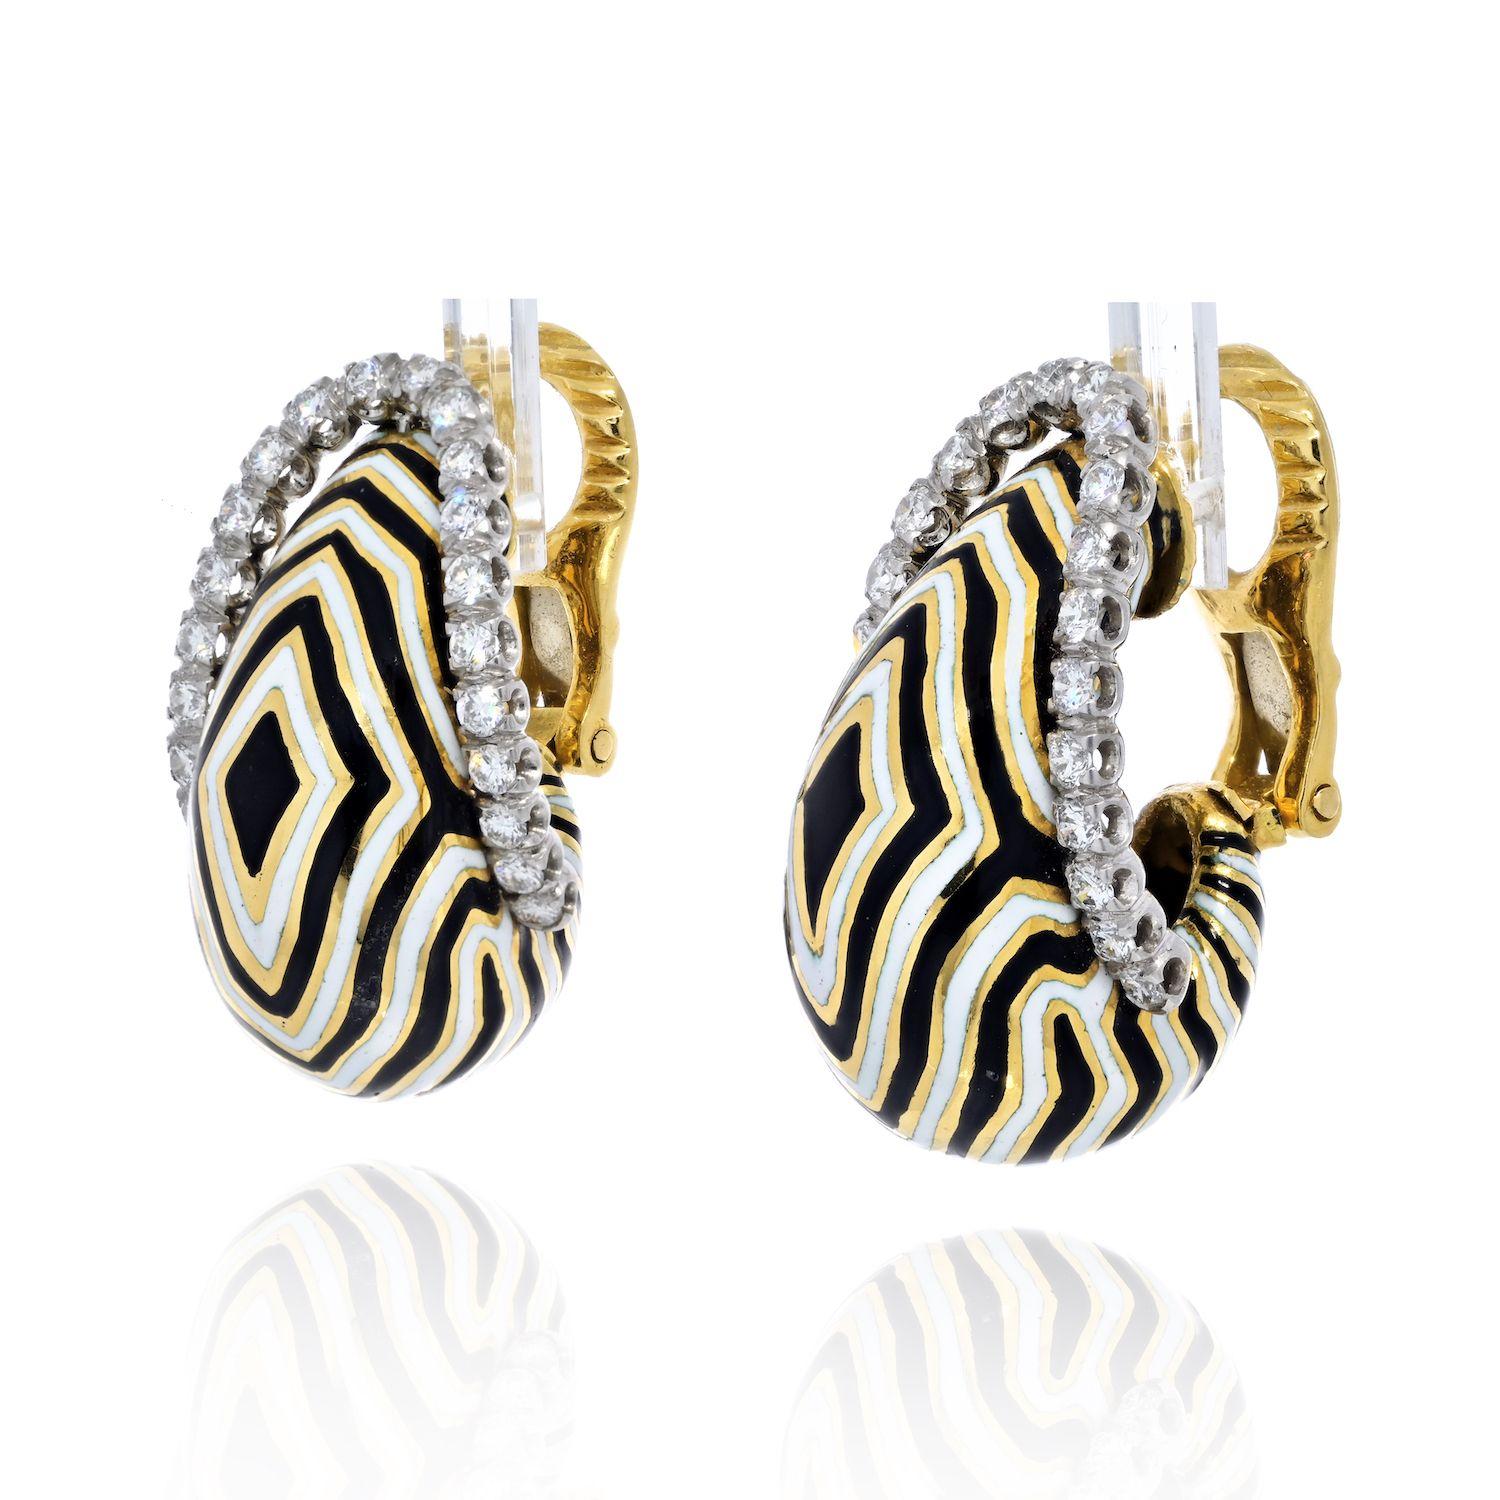 This is a staple of a design: Zebra Diamond Earrings by David Webb. Accented with round diamonds, wearable length and size these clip earrings can be a perfect gift for any jewelry lover. Black and white enameling is in great condition. Length: 1